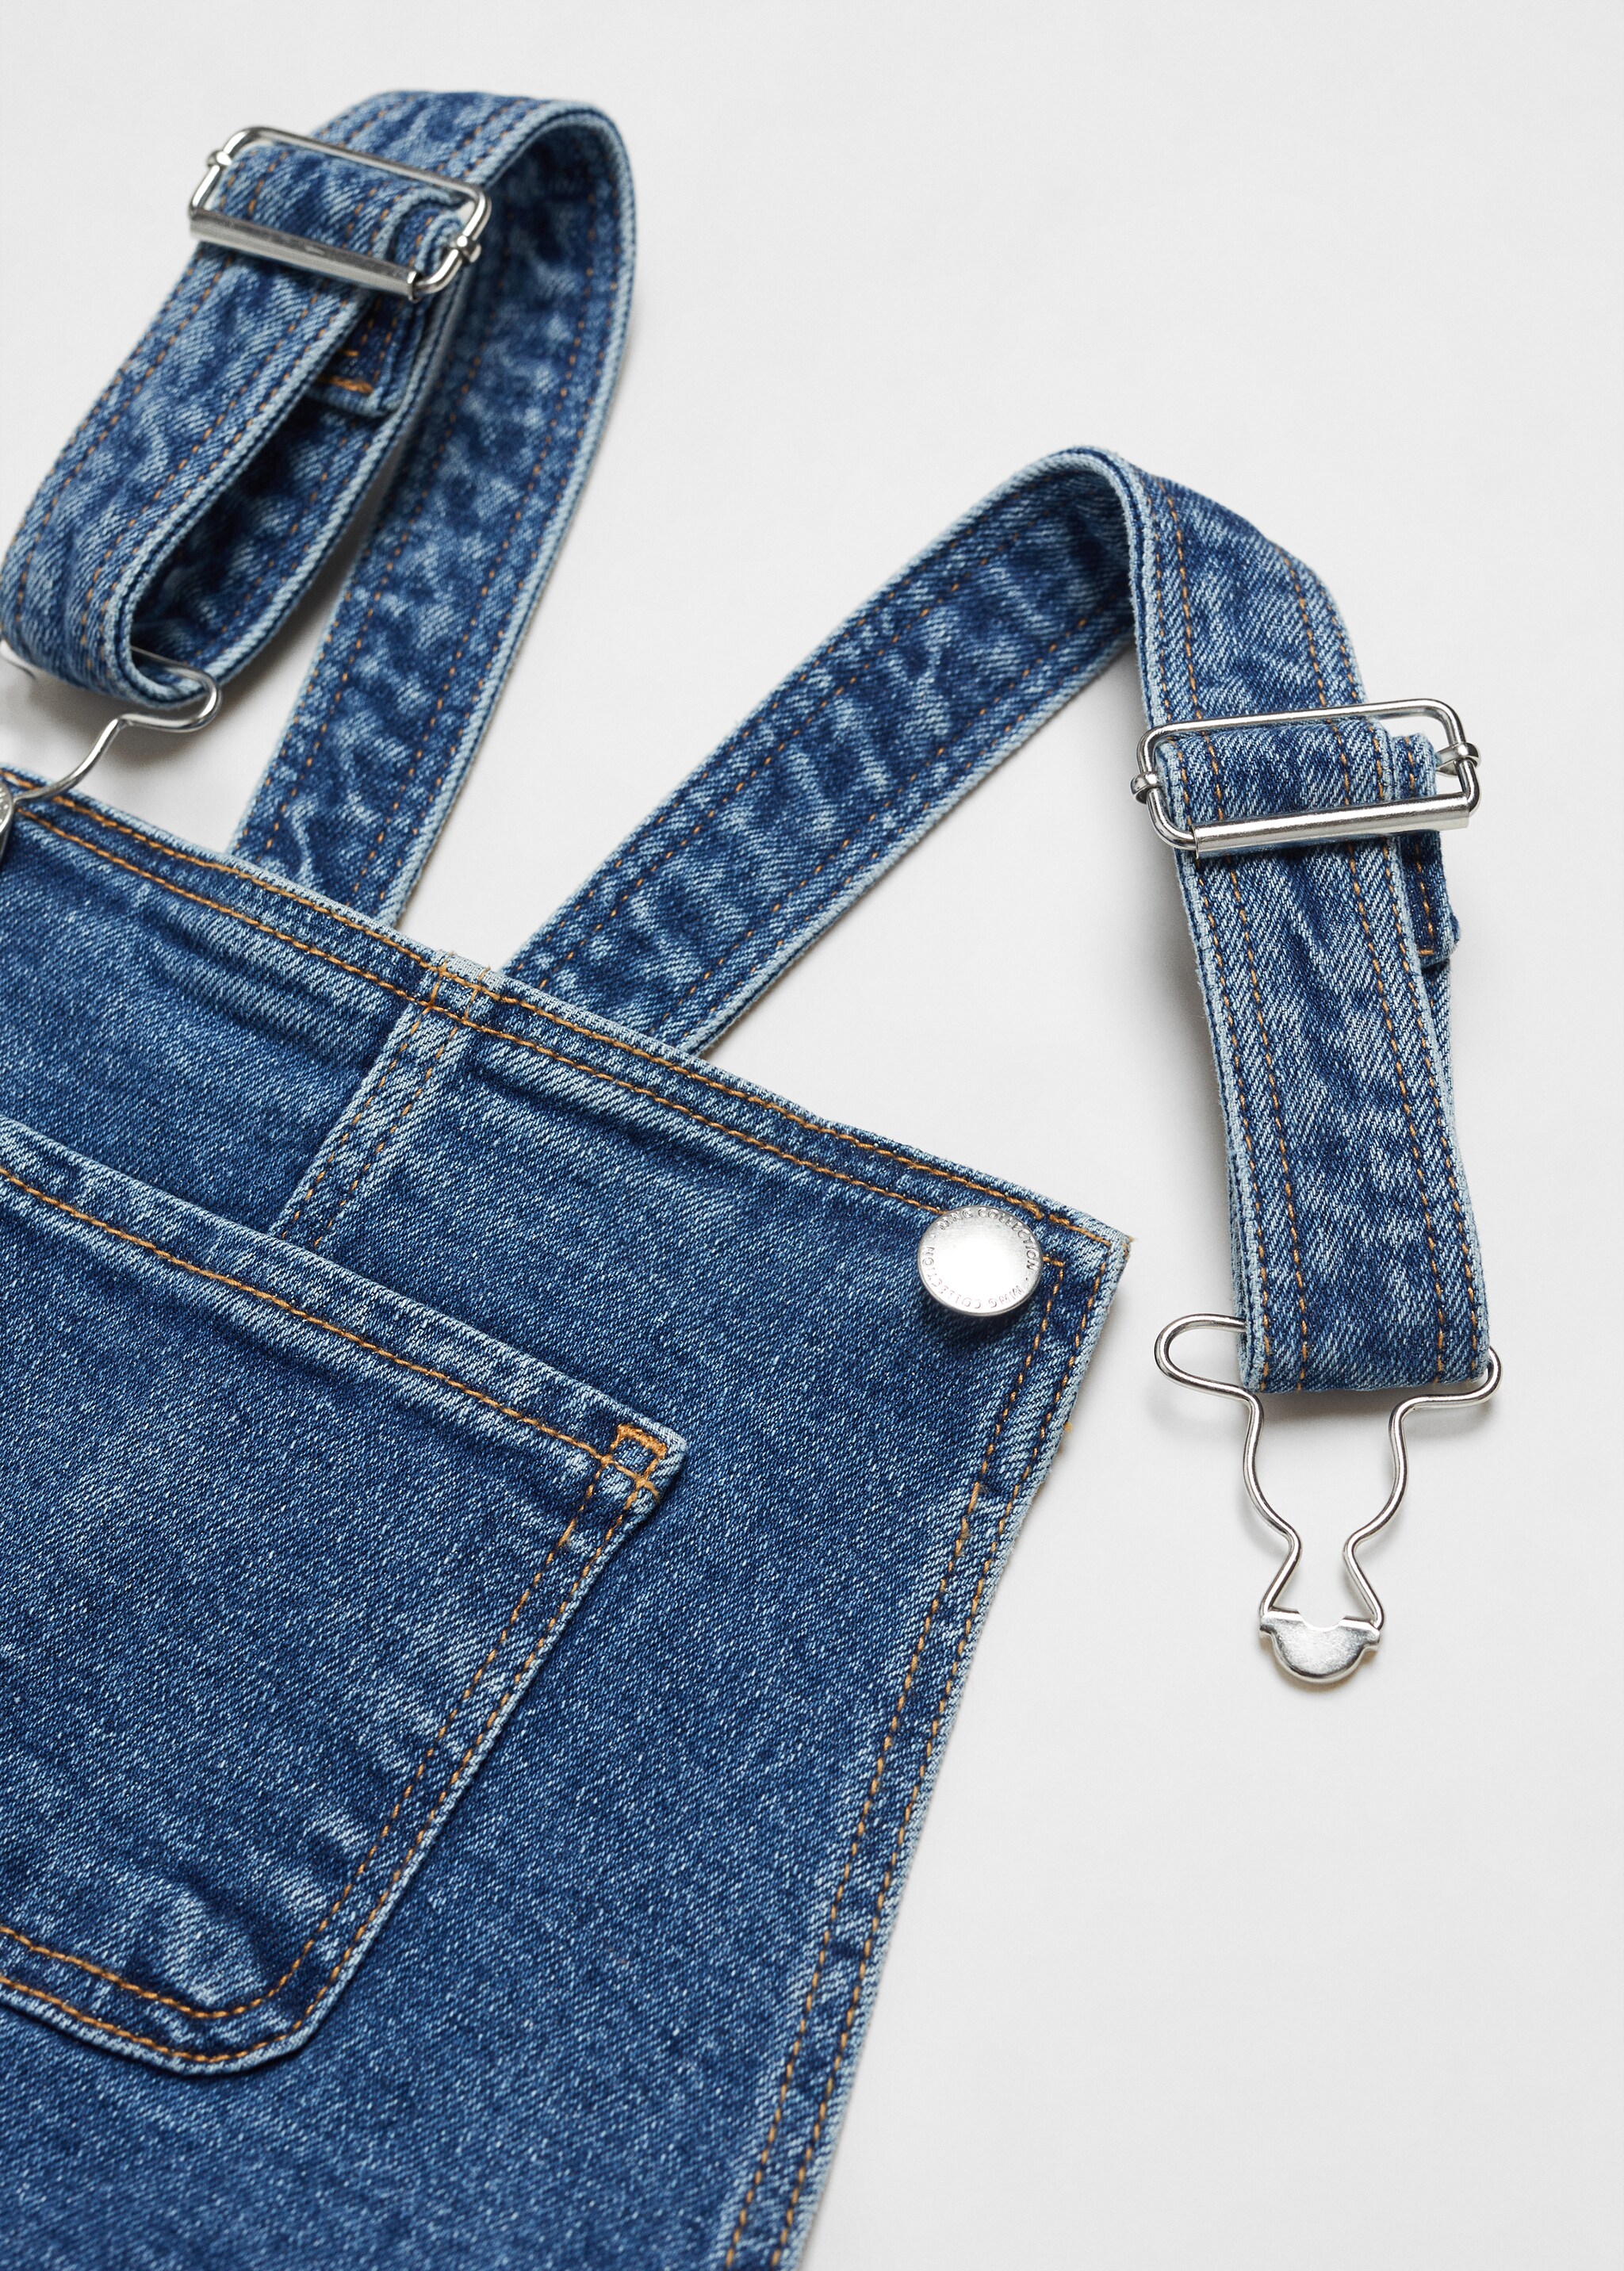 Long denim dungarees - Details of the article 8